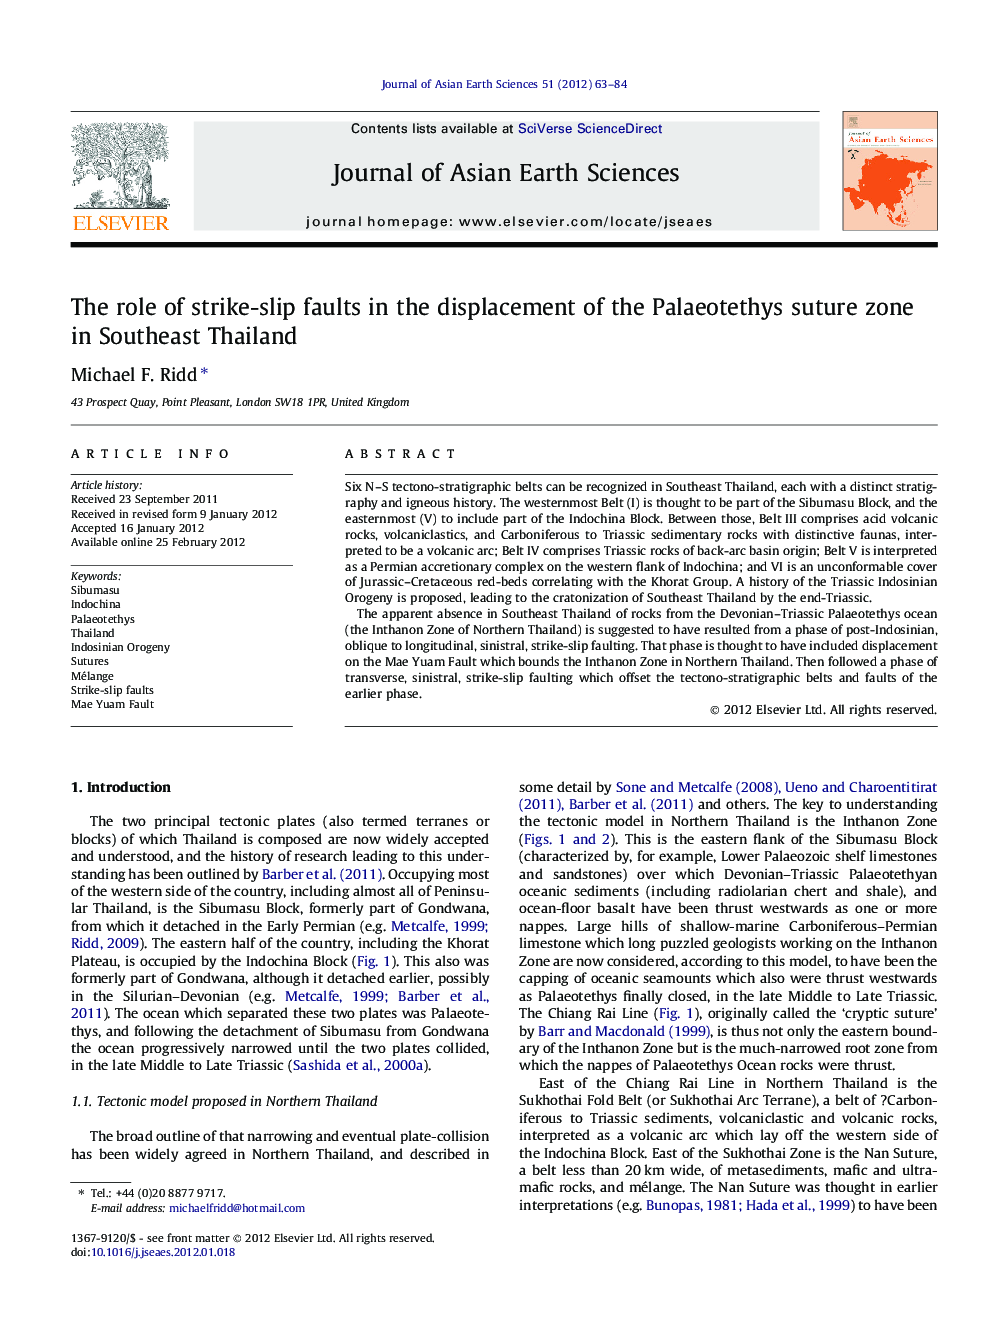 The role of strike-slip faults in the displacement of the Palaeotethys suture zone in Southeast Thailand